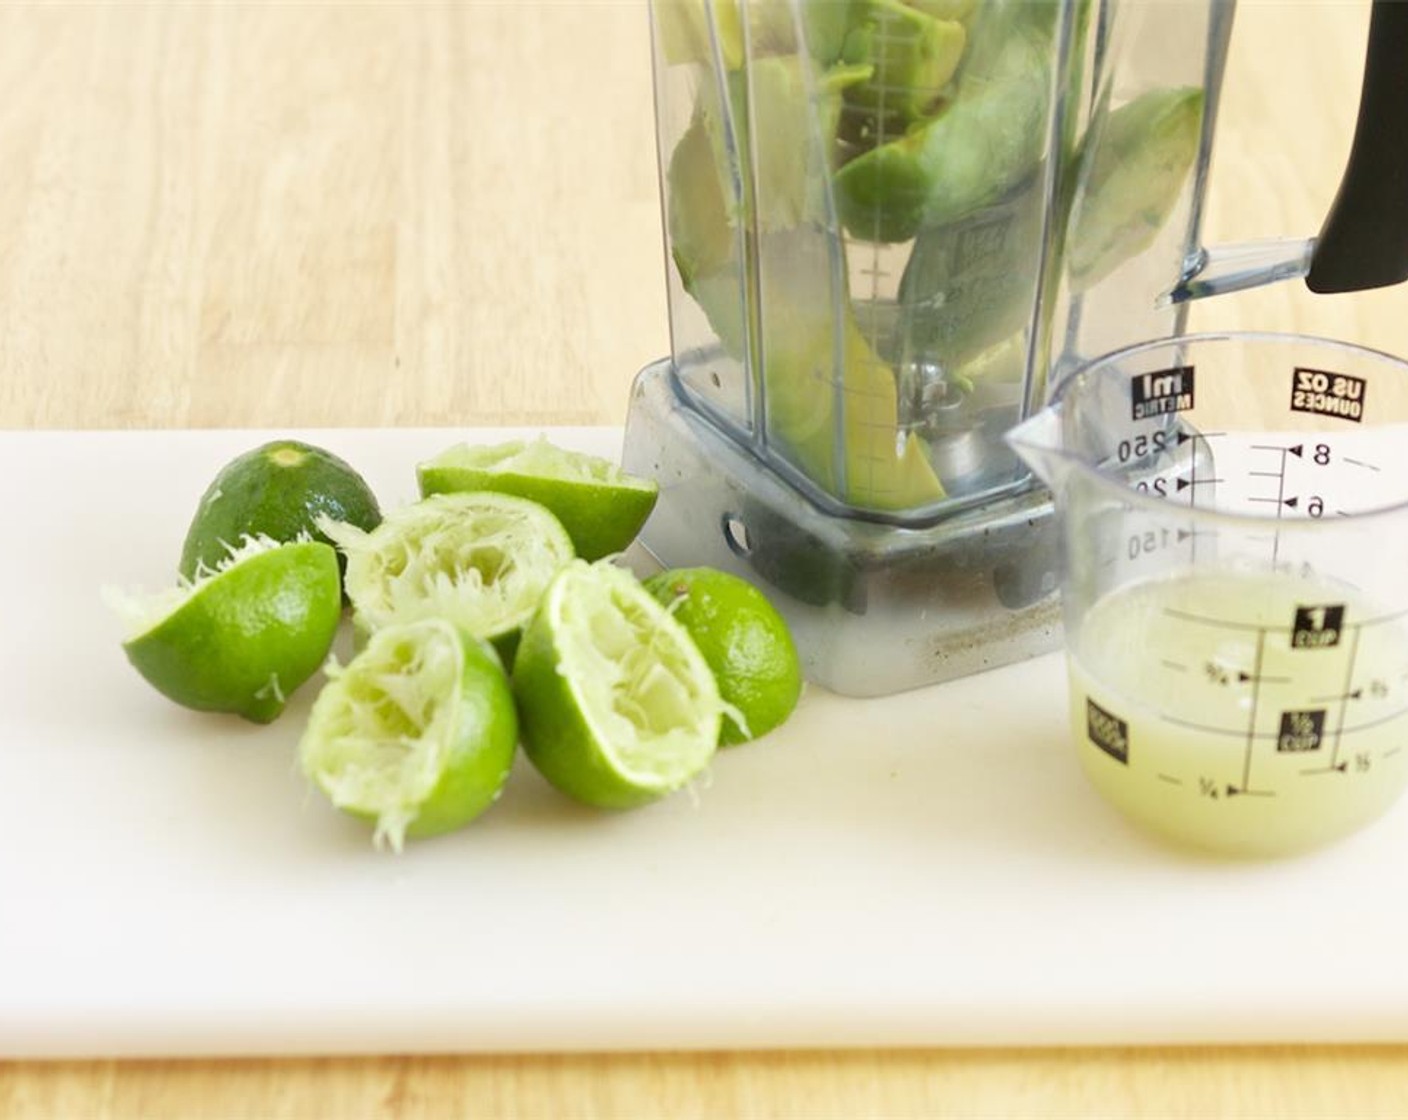 step 1 Place the Coconut Milk (1 can), Avocados (2), Maple Syrup (1 cup), Limes (5), and Water (1/4 cup) into a blender or food processor and blend until smooth. For either appliance, scrape down the sides a couple of times for a smooth texture.